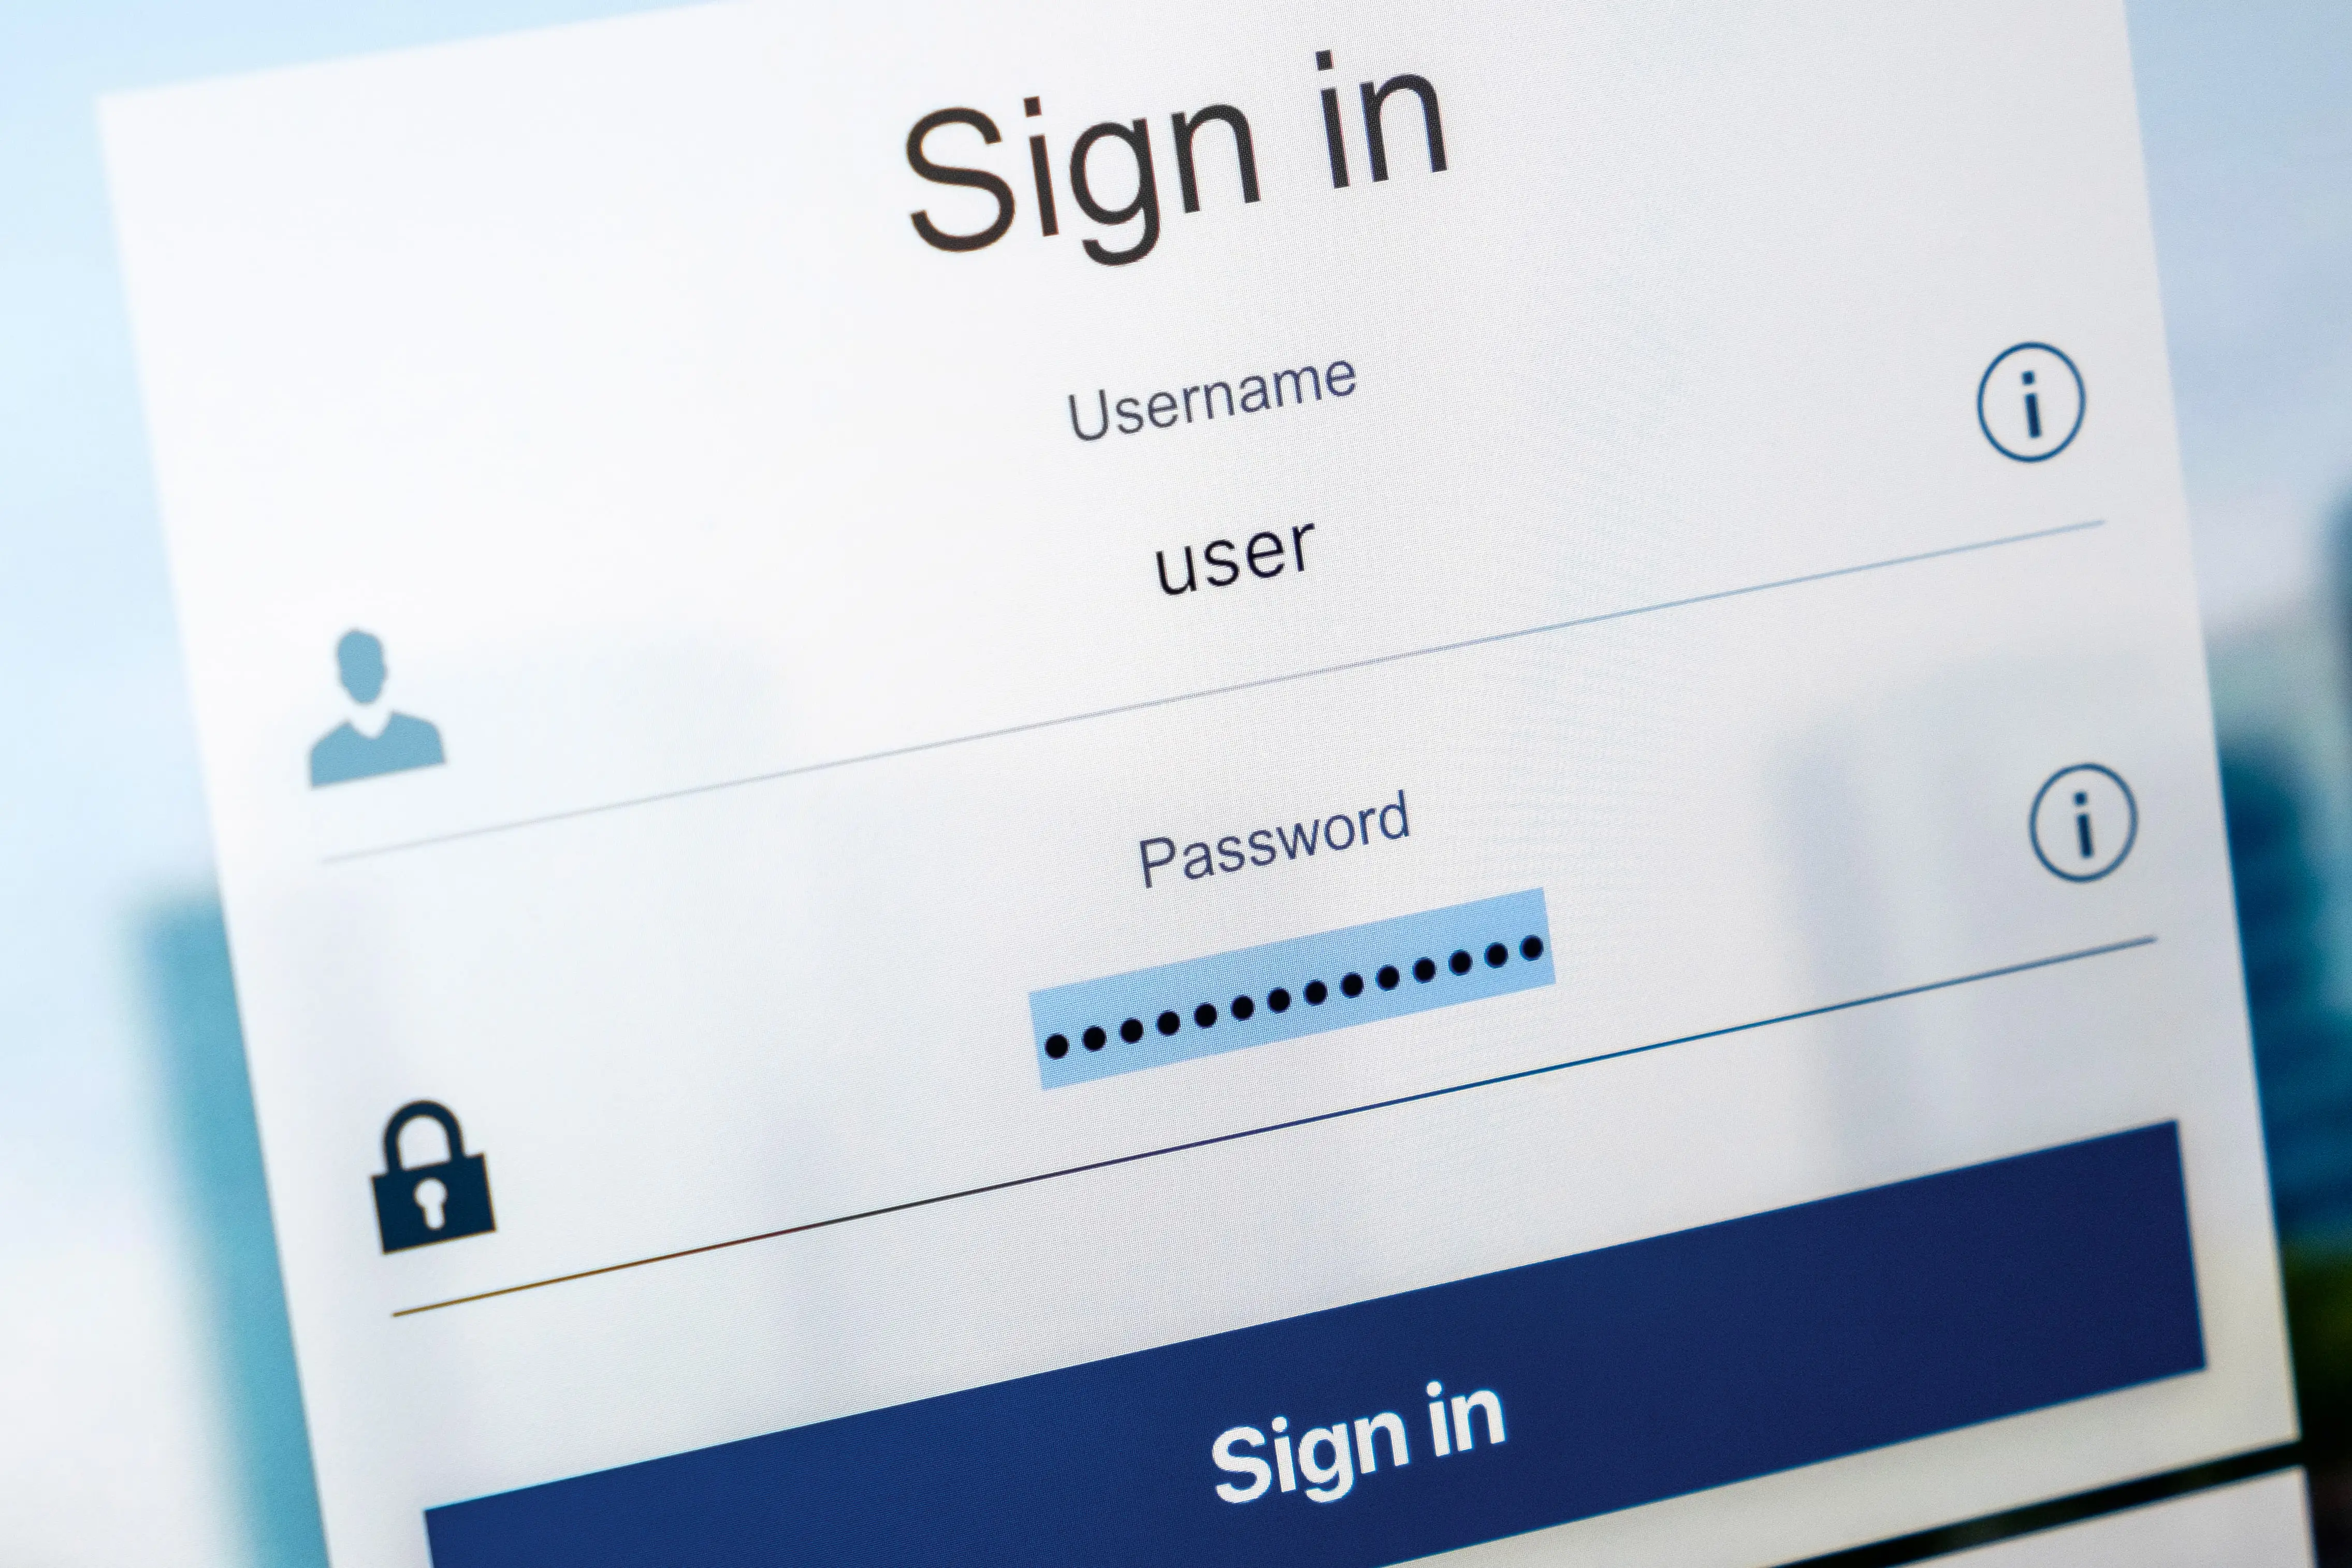 How to Store 100 Passwords Safely